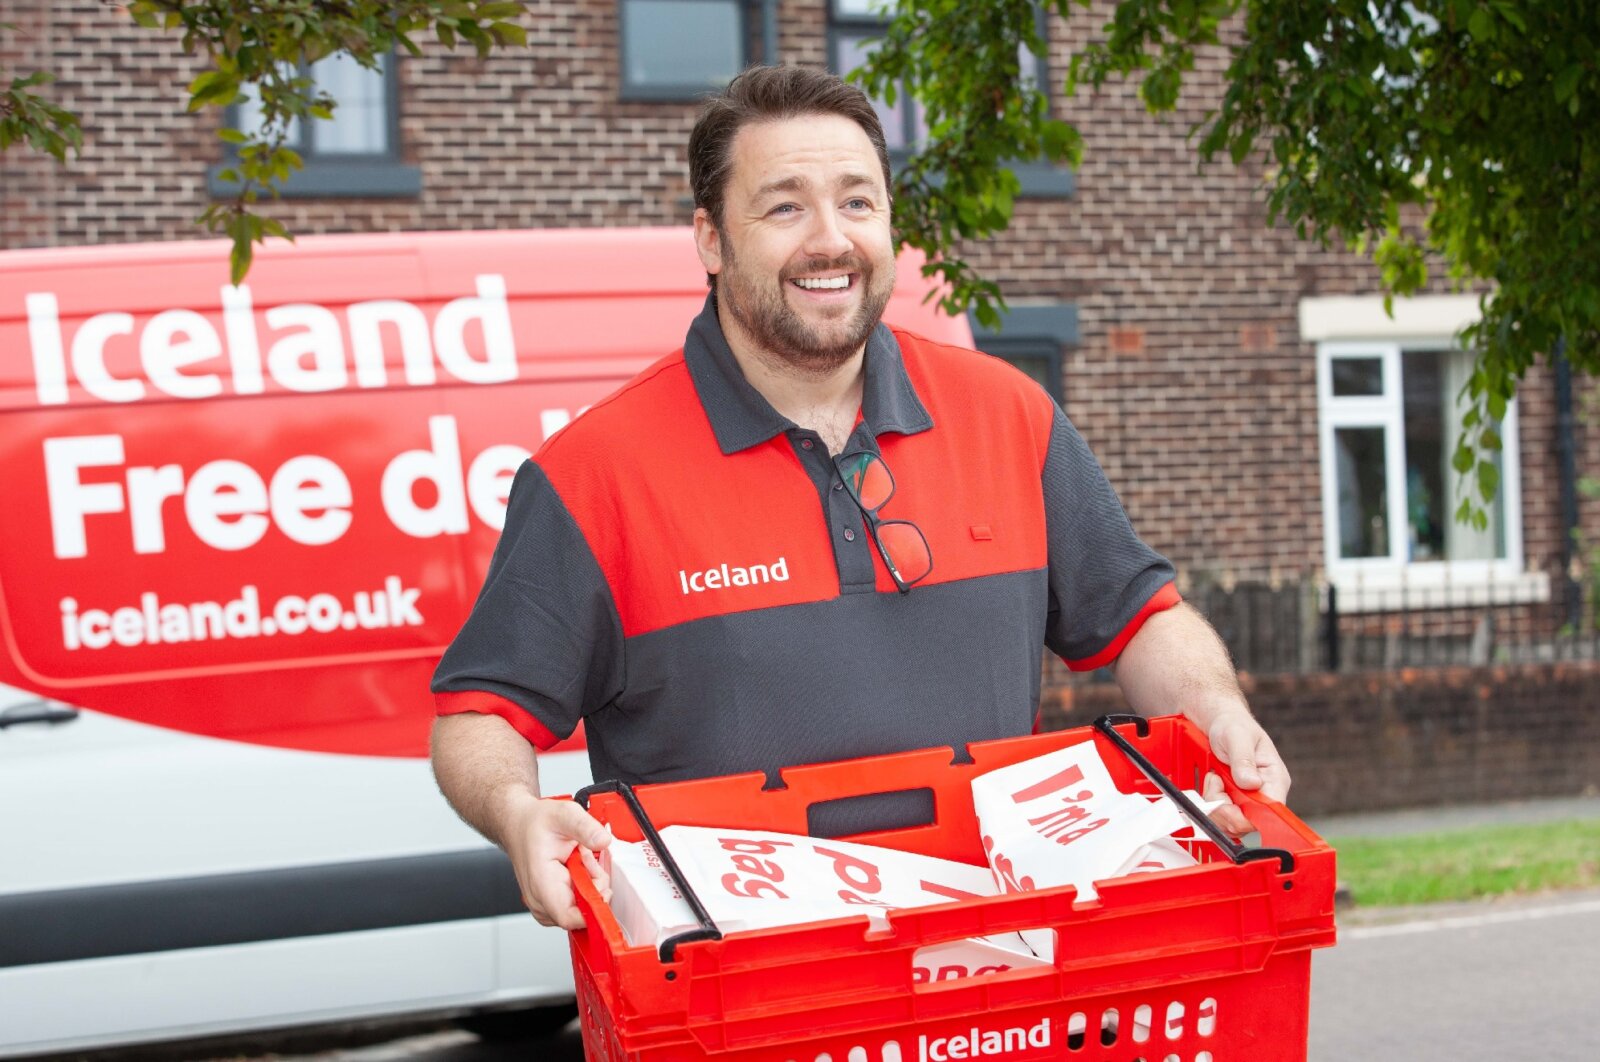 Jason Manford did a round as an Iceland delivery driver in Manchester today, The Manc